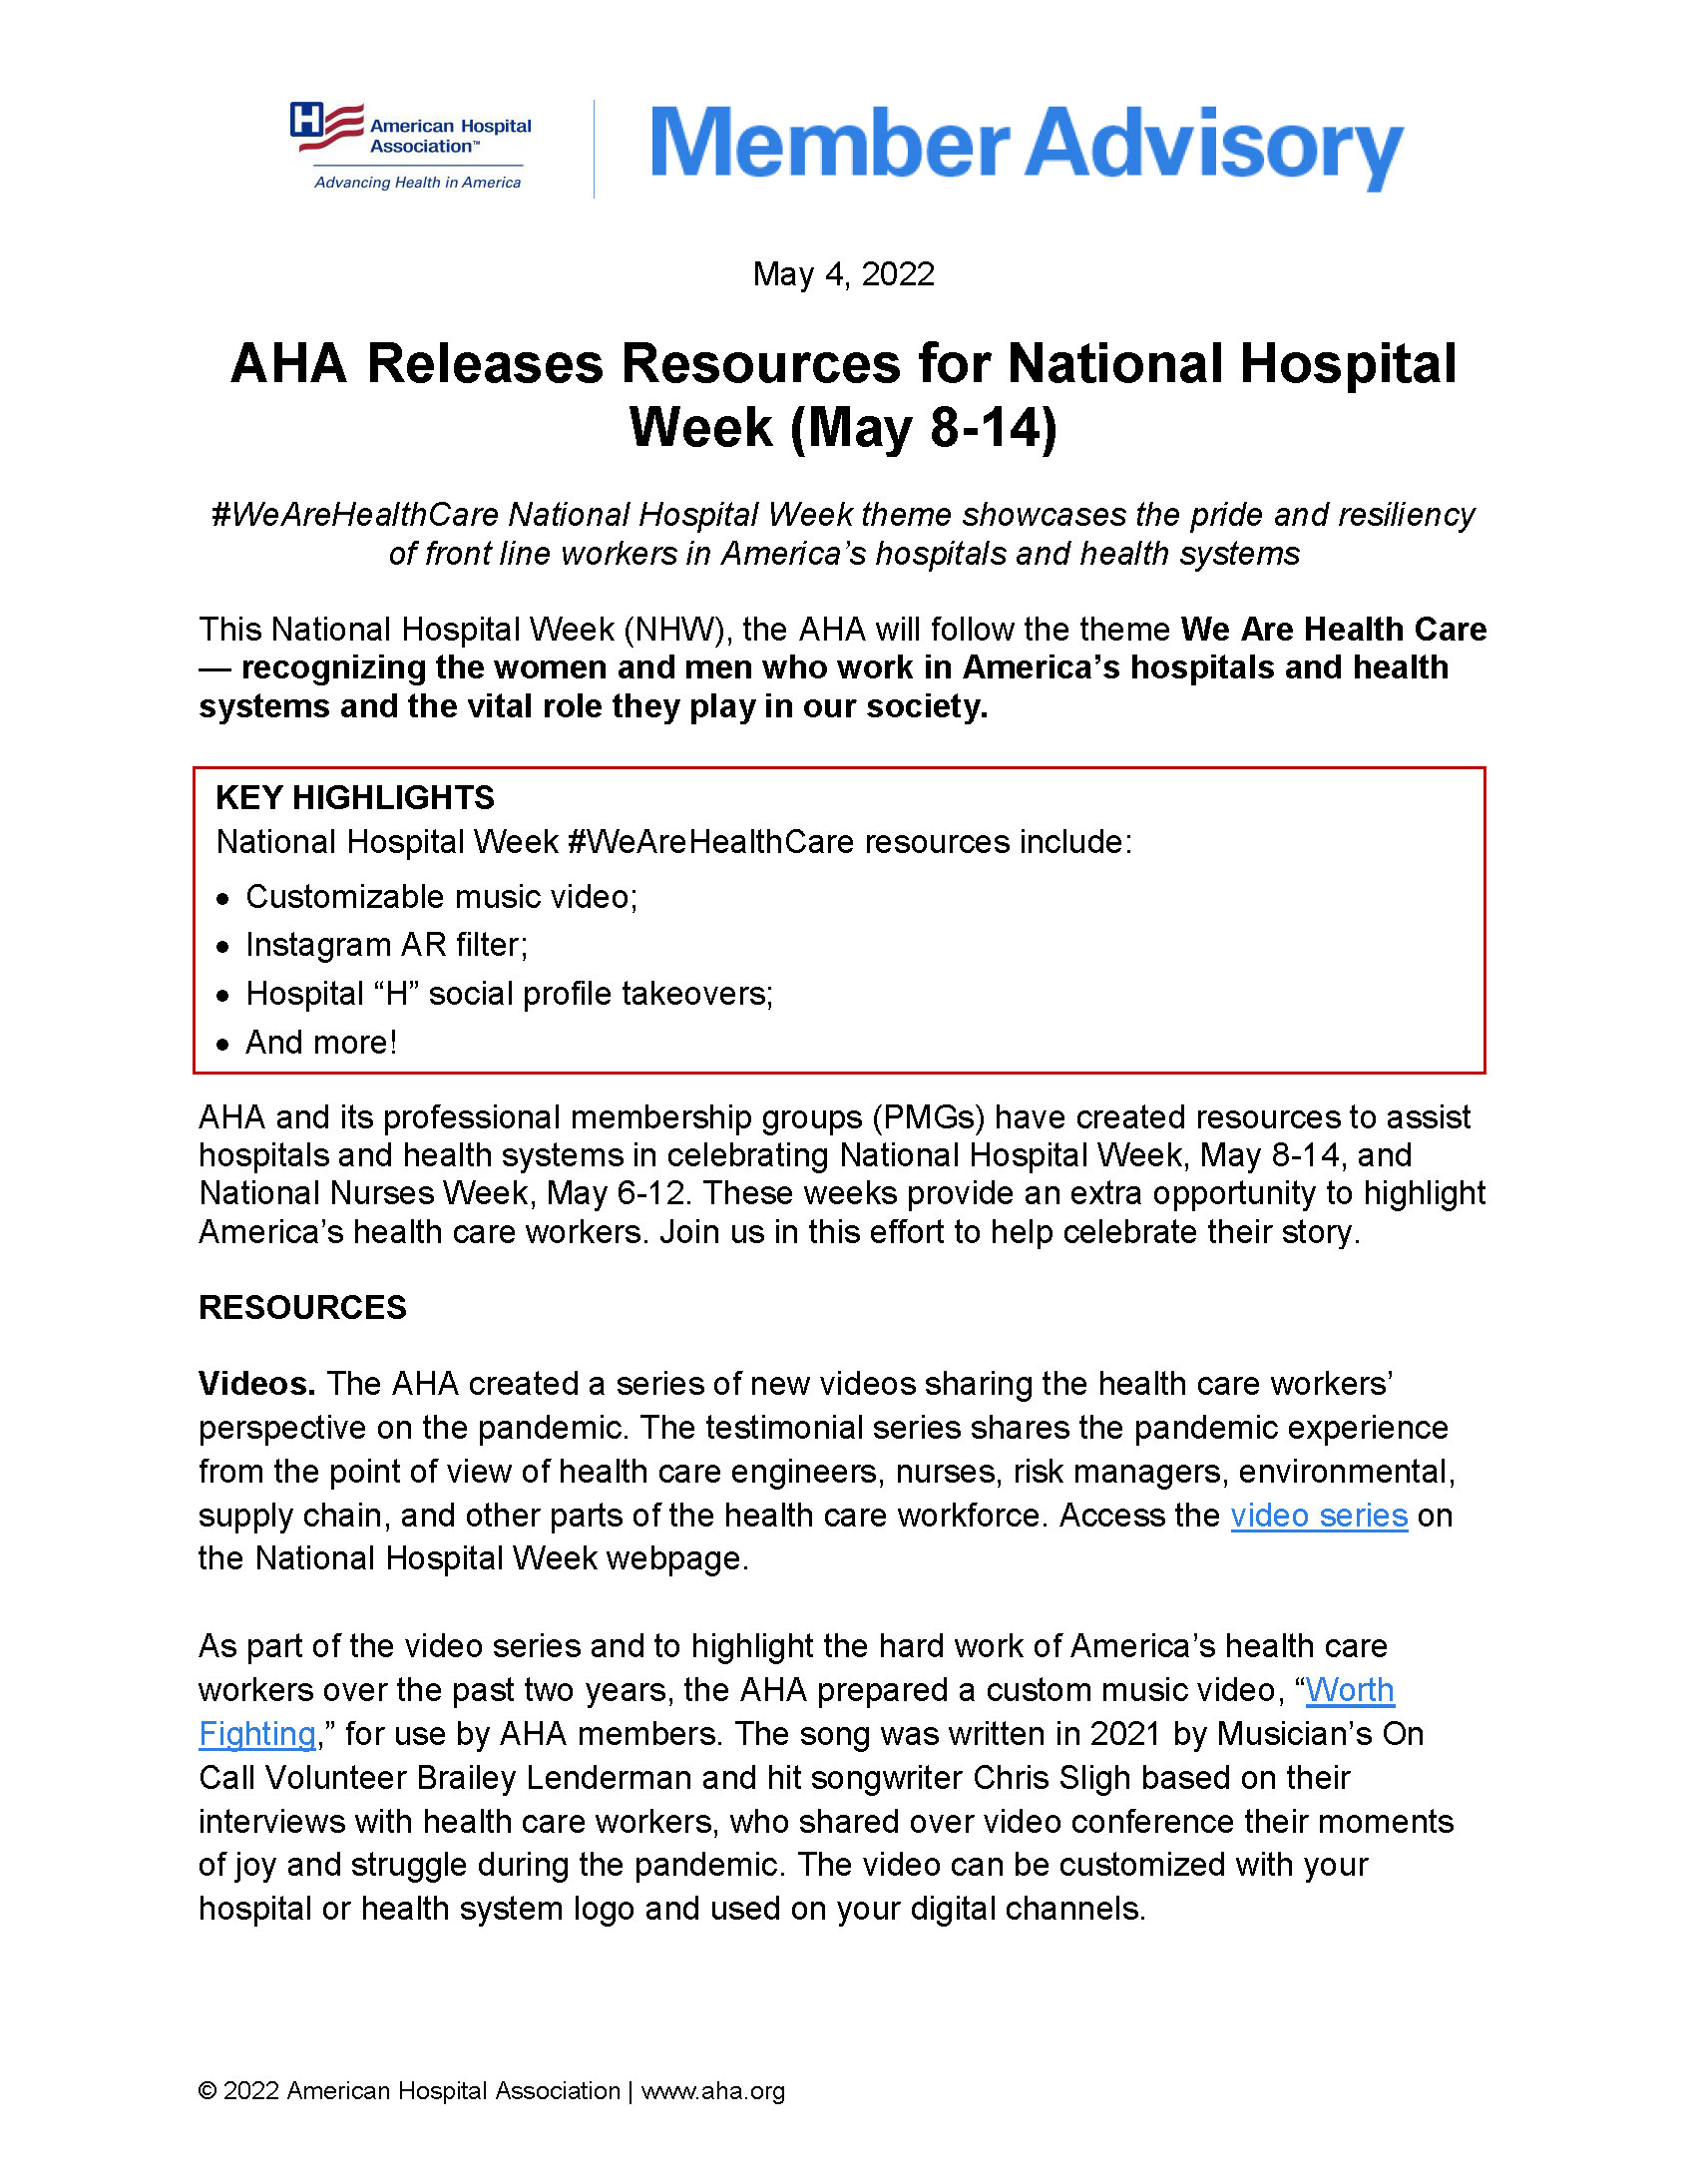 Member Advisory: AHA Releases National Hospital Week Resources PDF page 1.